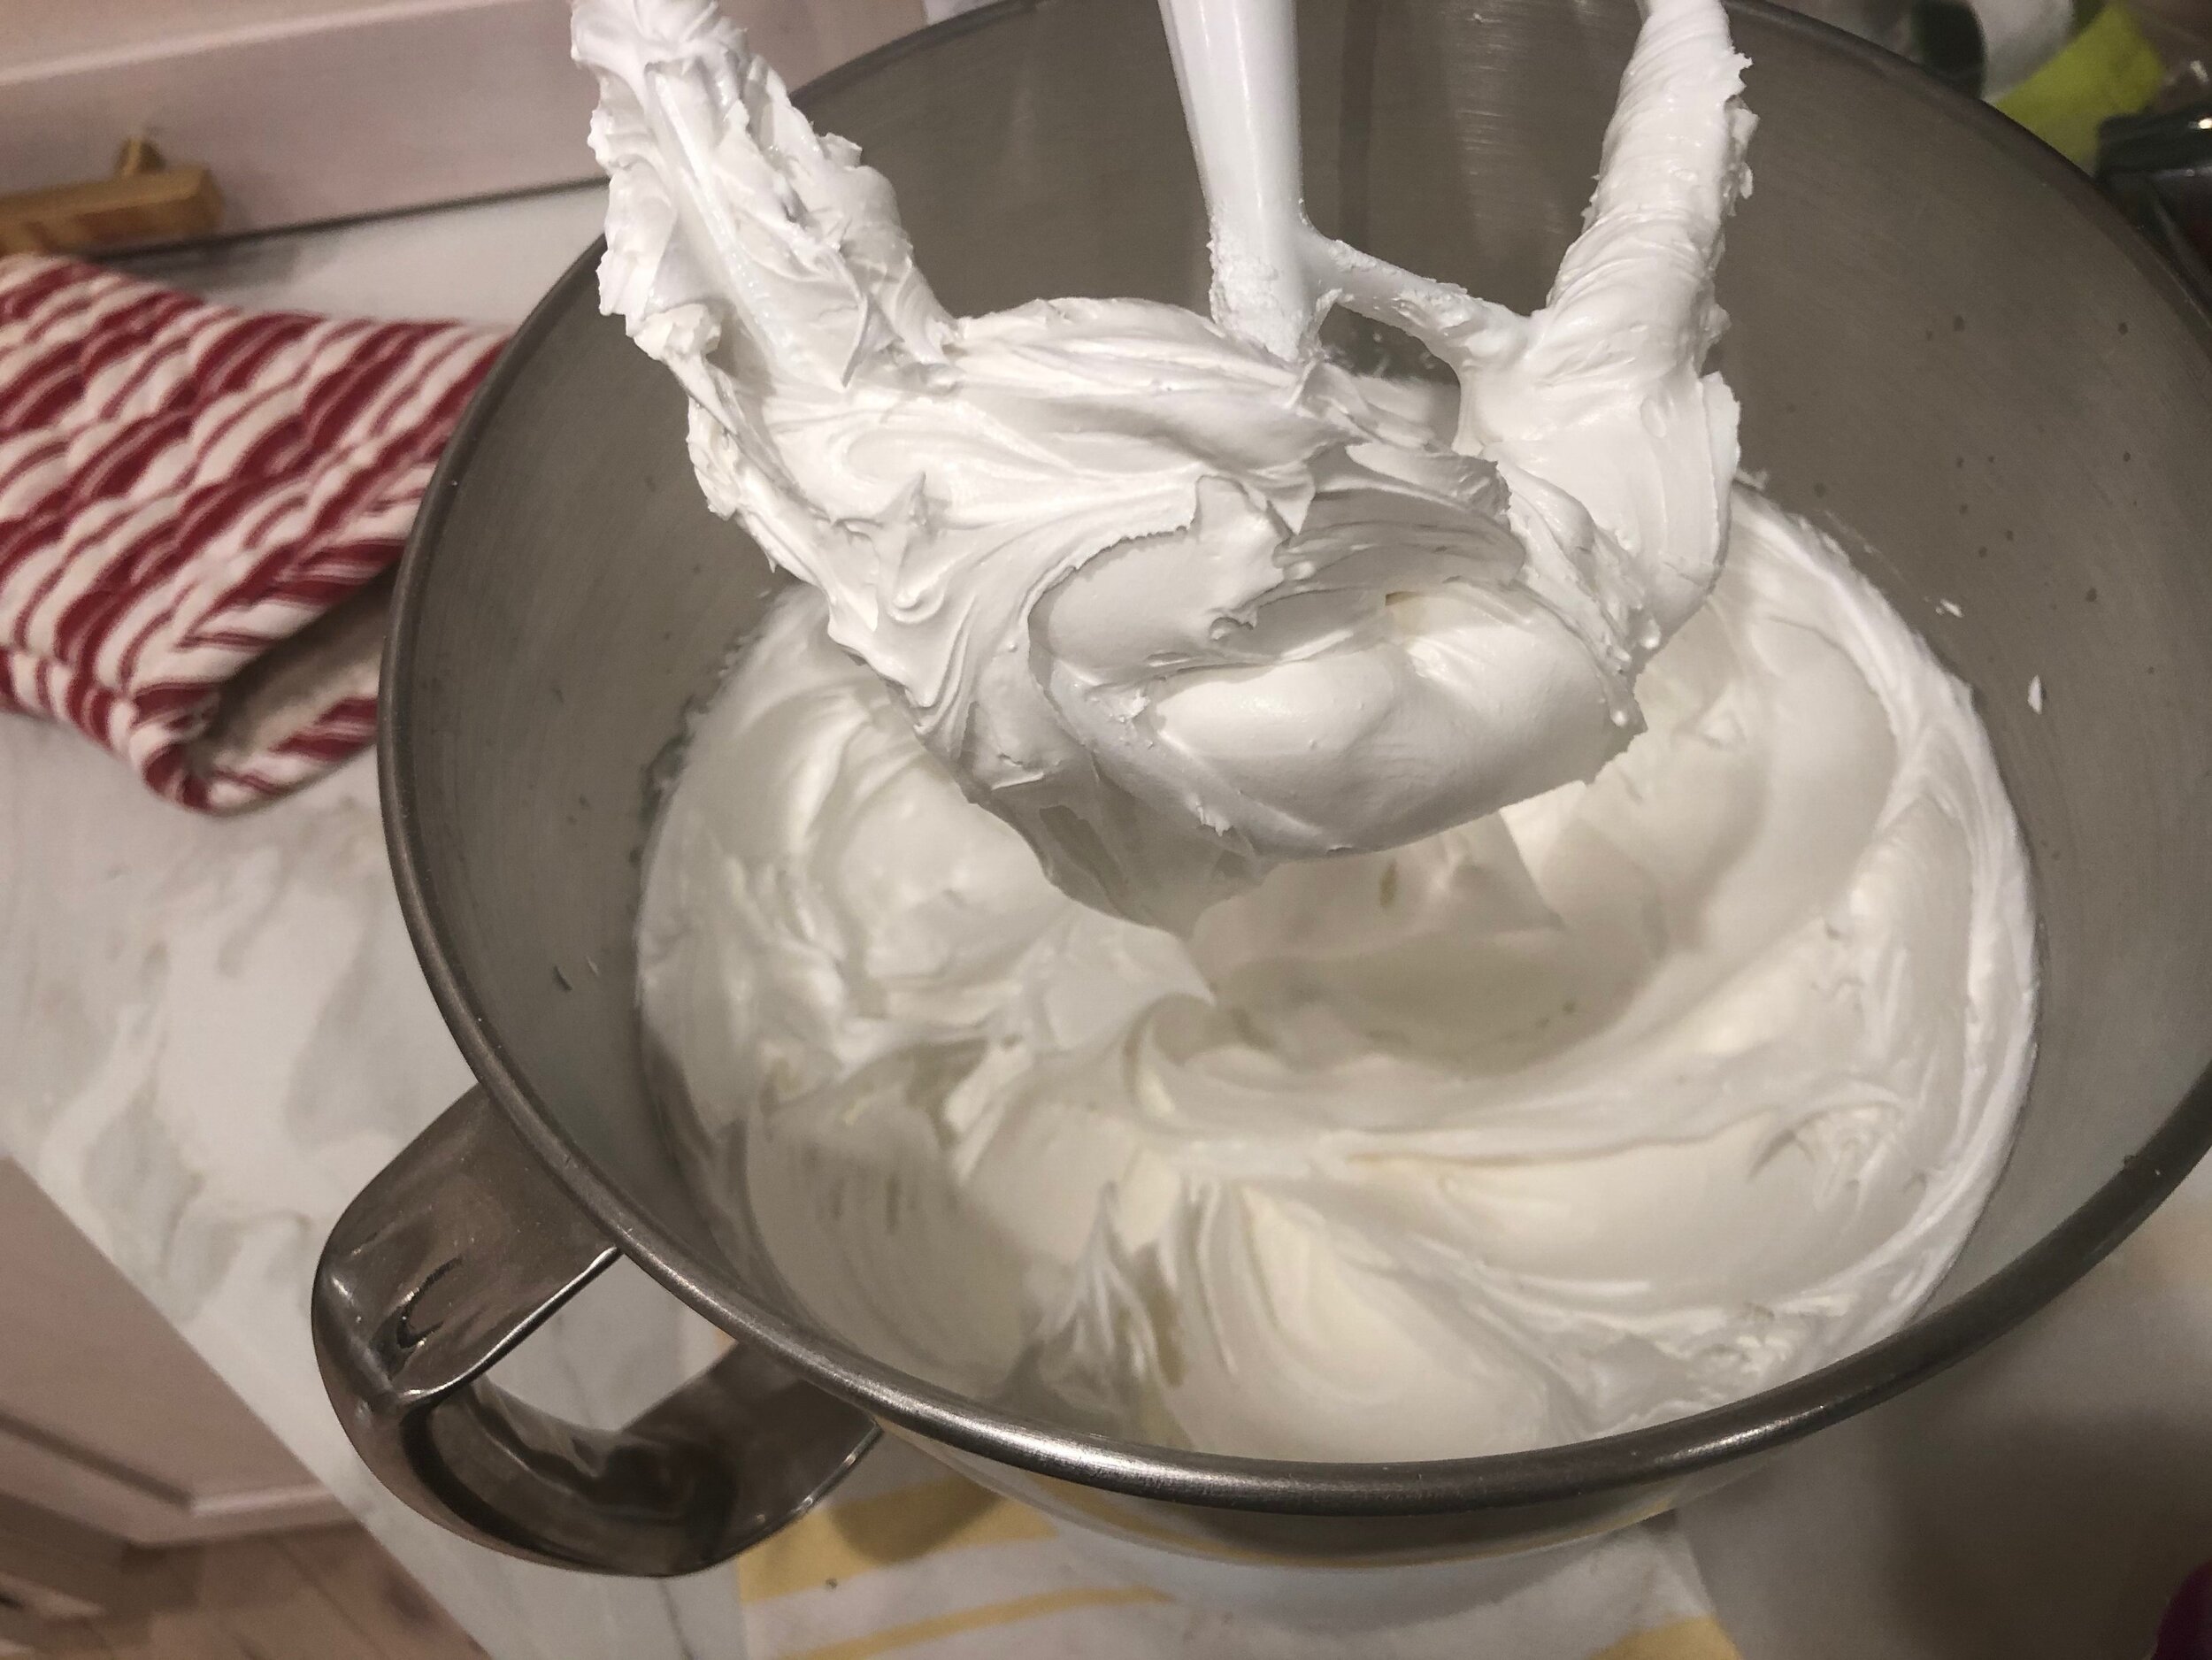  Mix on medium high for about 4 minutes. After 4 minutes this is what the icing will look like with stiff peaks. The icing sticks to the paddle. 